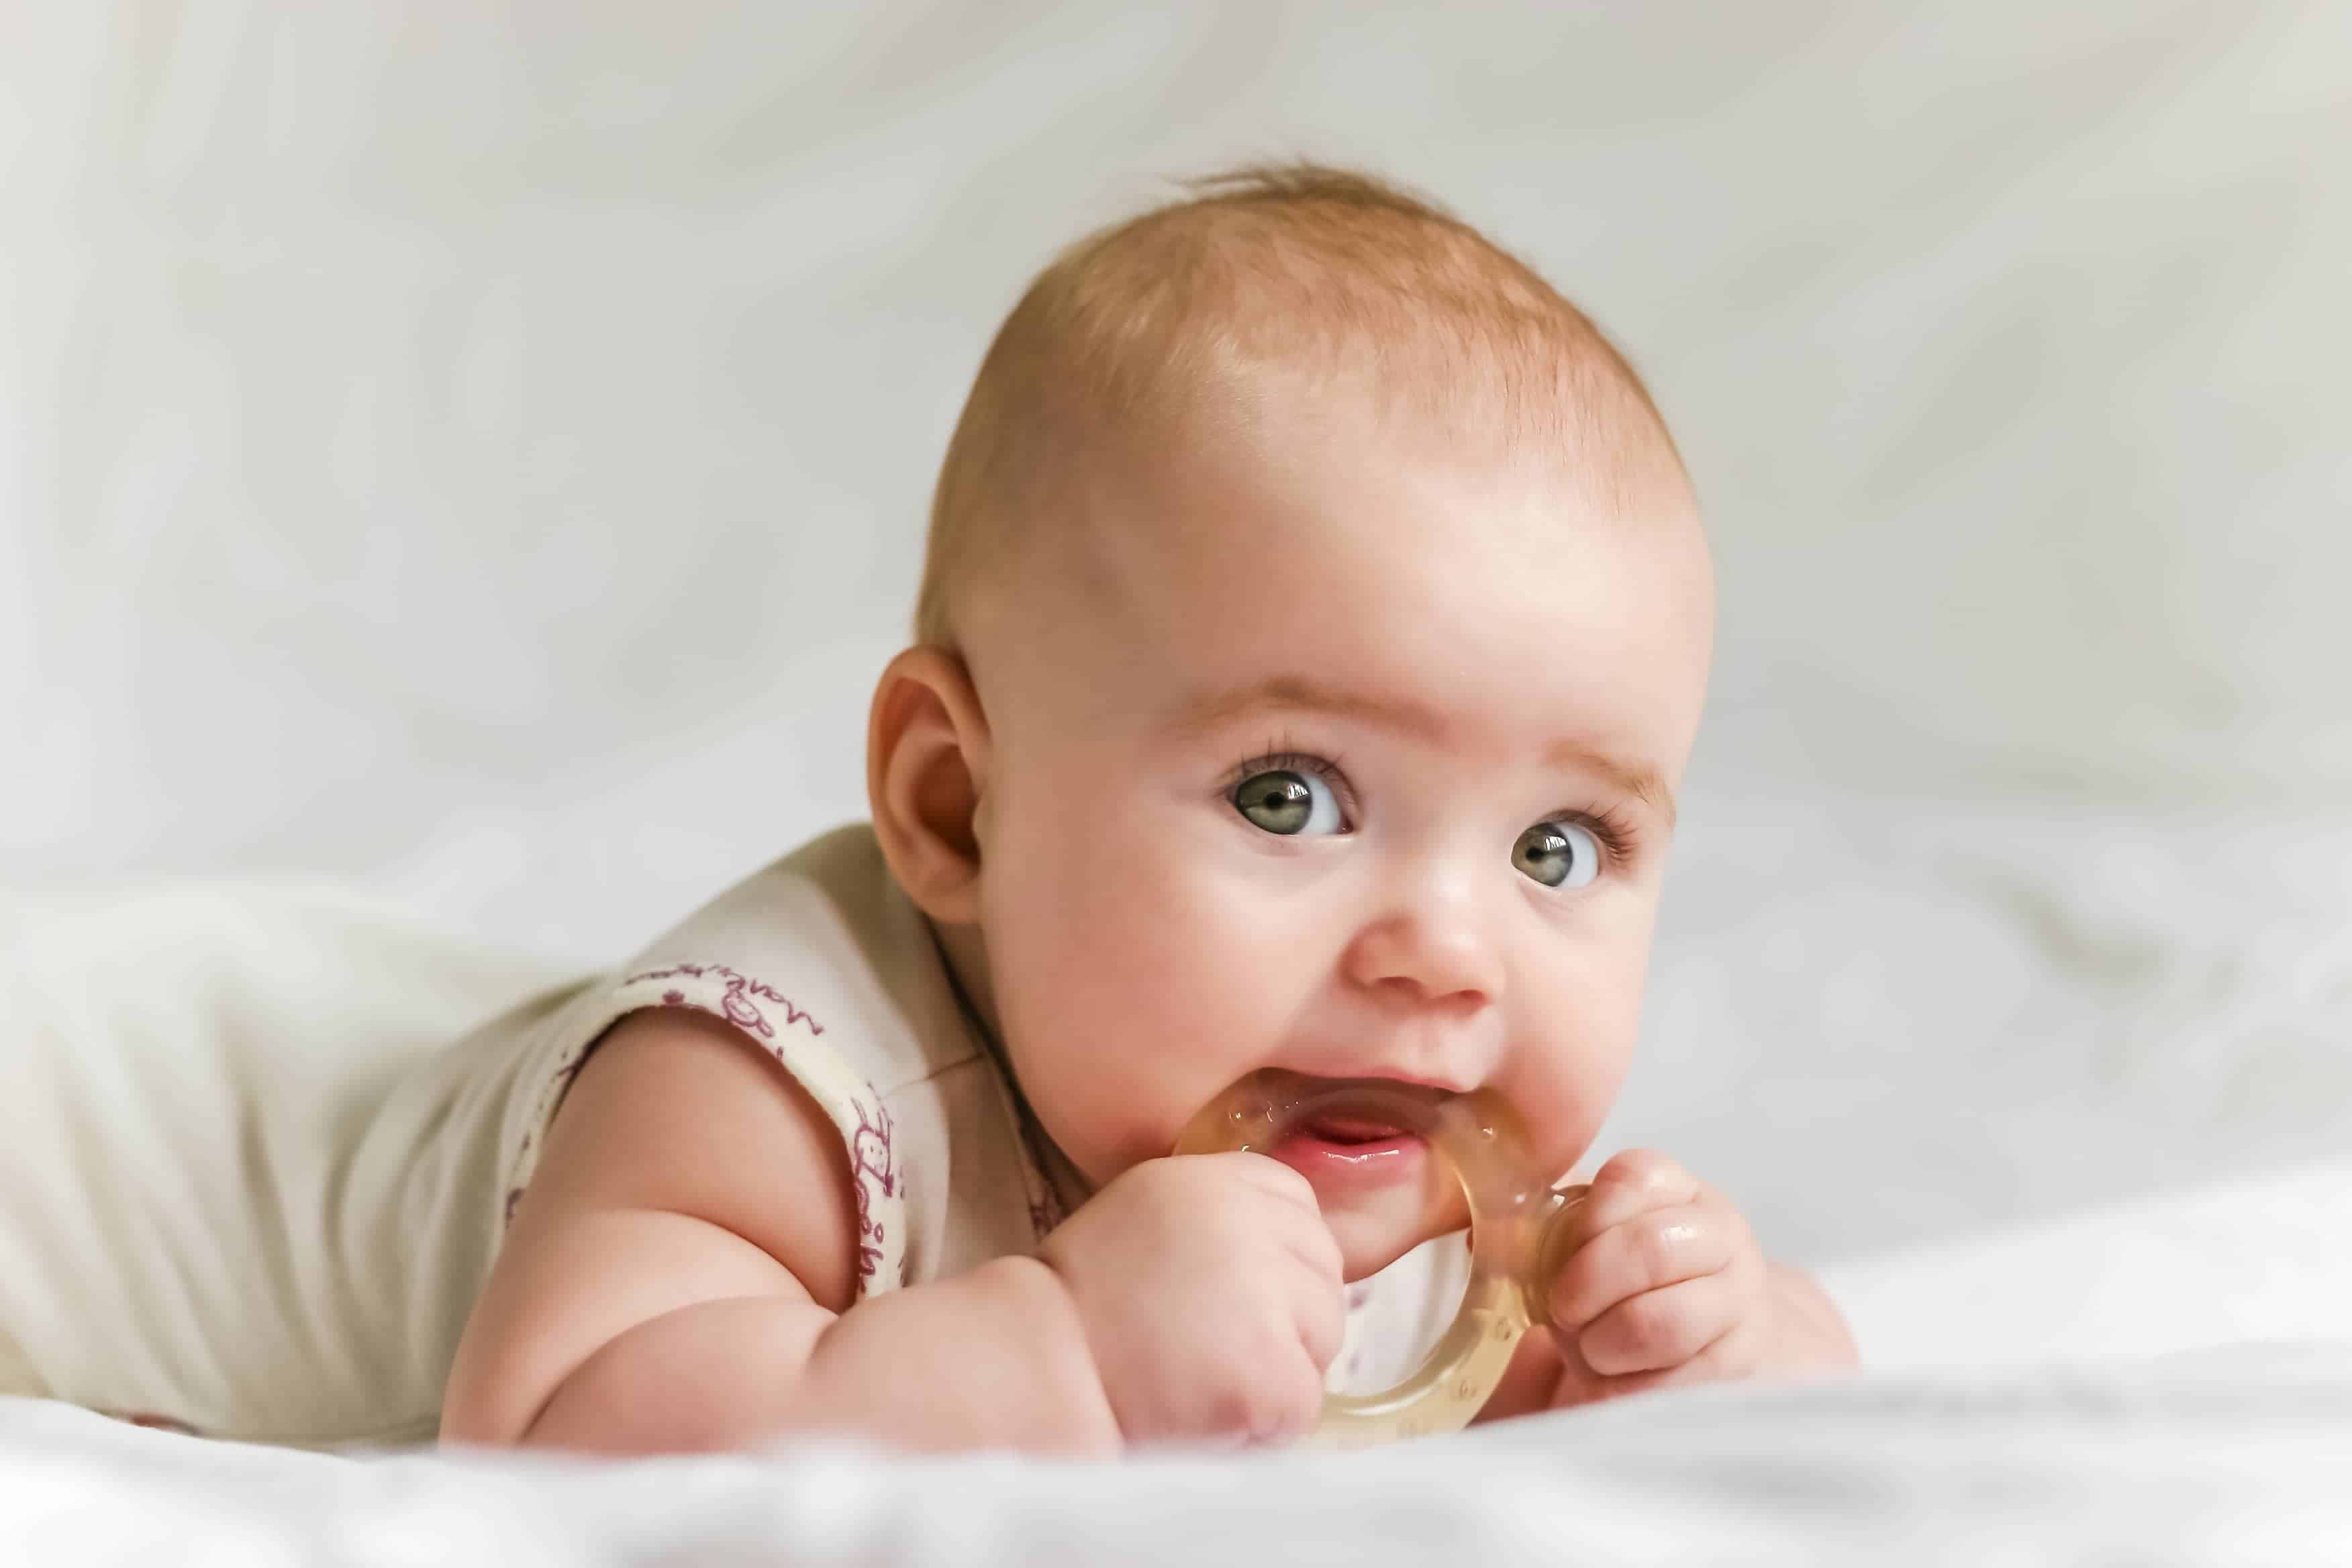 When Do You Know If It’s Teething?